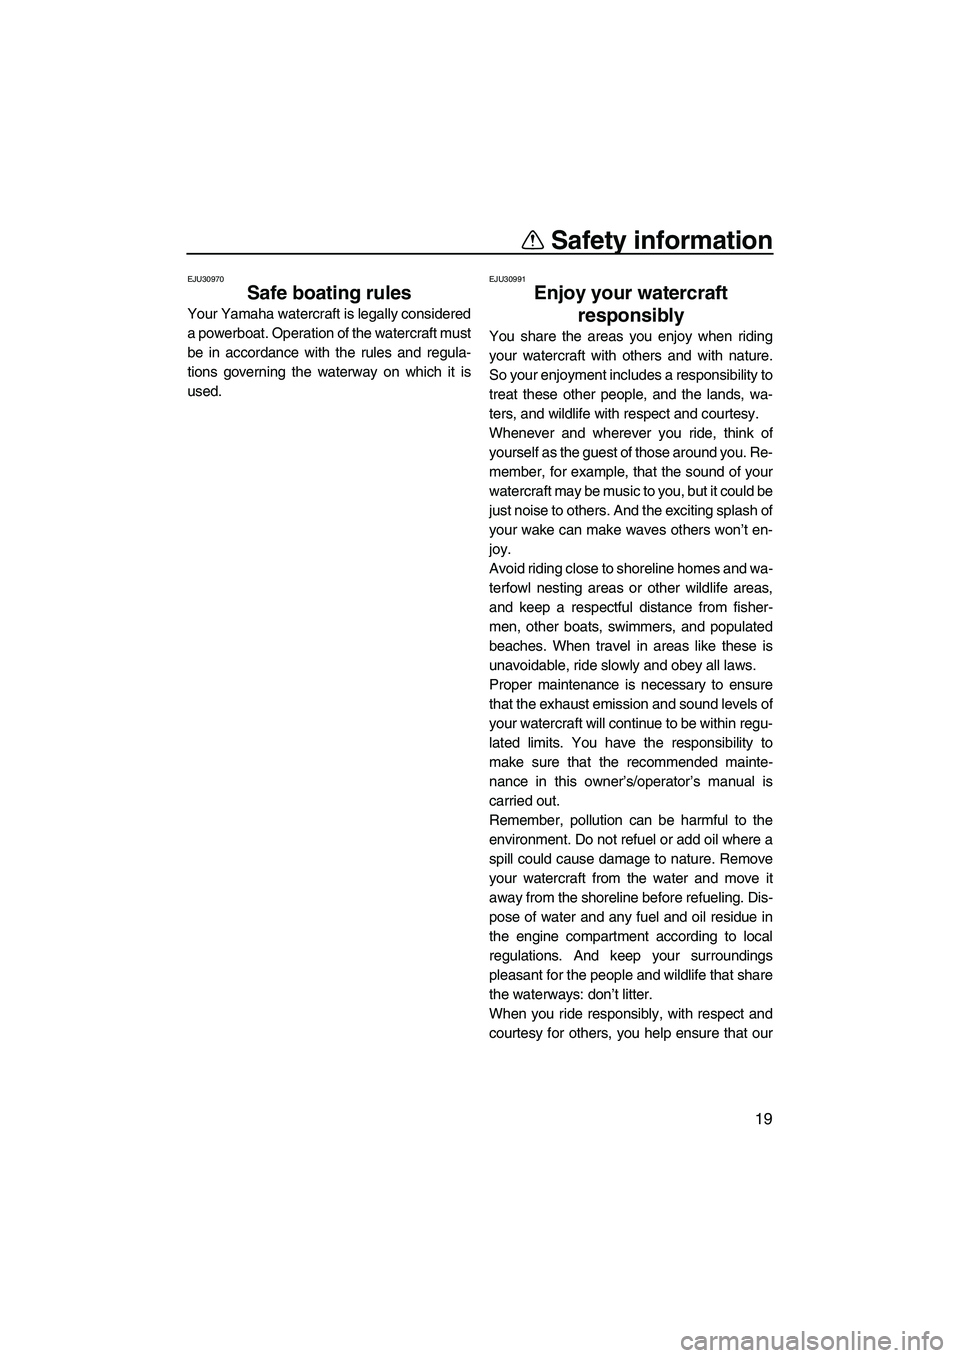 YAMAHA SVHO 2011 Owners Manual Safety information
19
EJU30970
Safe boating rules 
Your Yamaha watercraft is legally considered
a powerboat. Operation of the watercraft must
be in accordance with the rules and regula-
tions governin